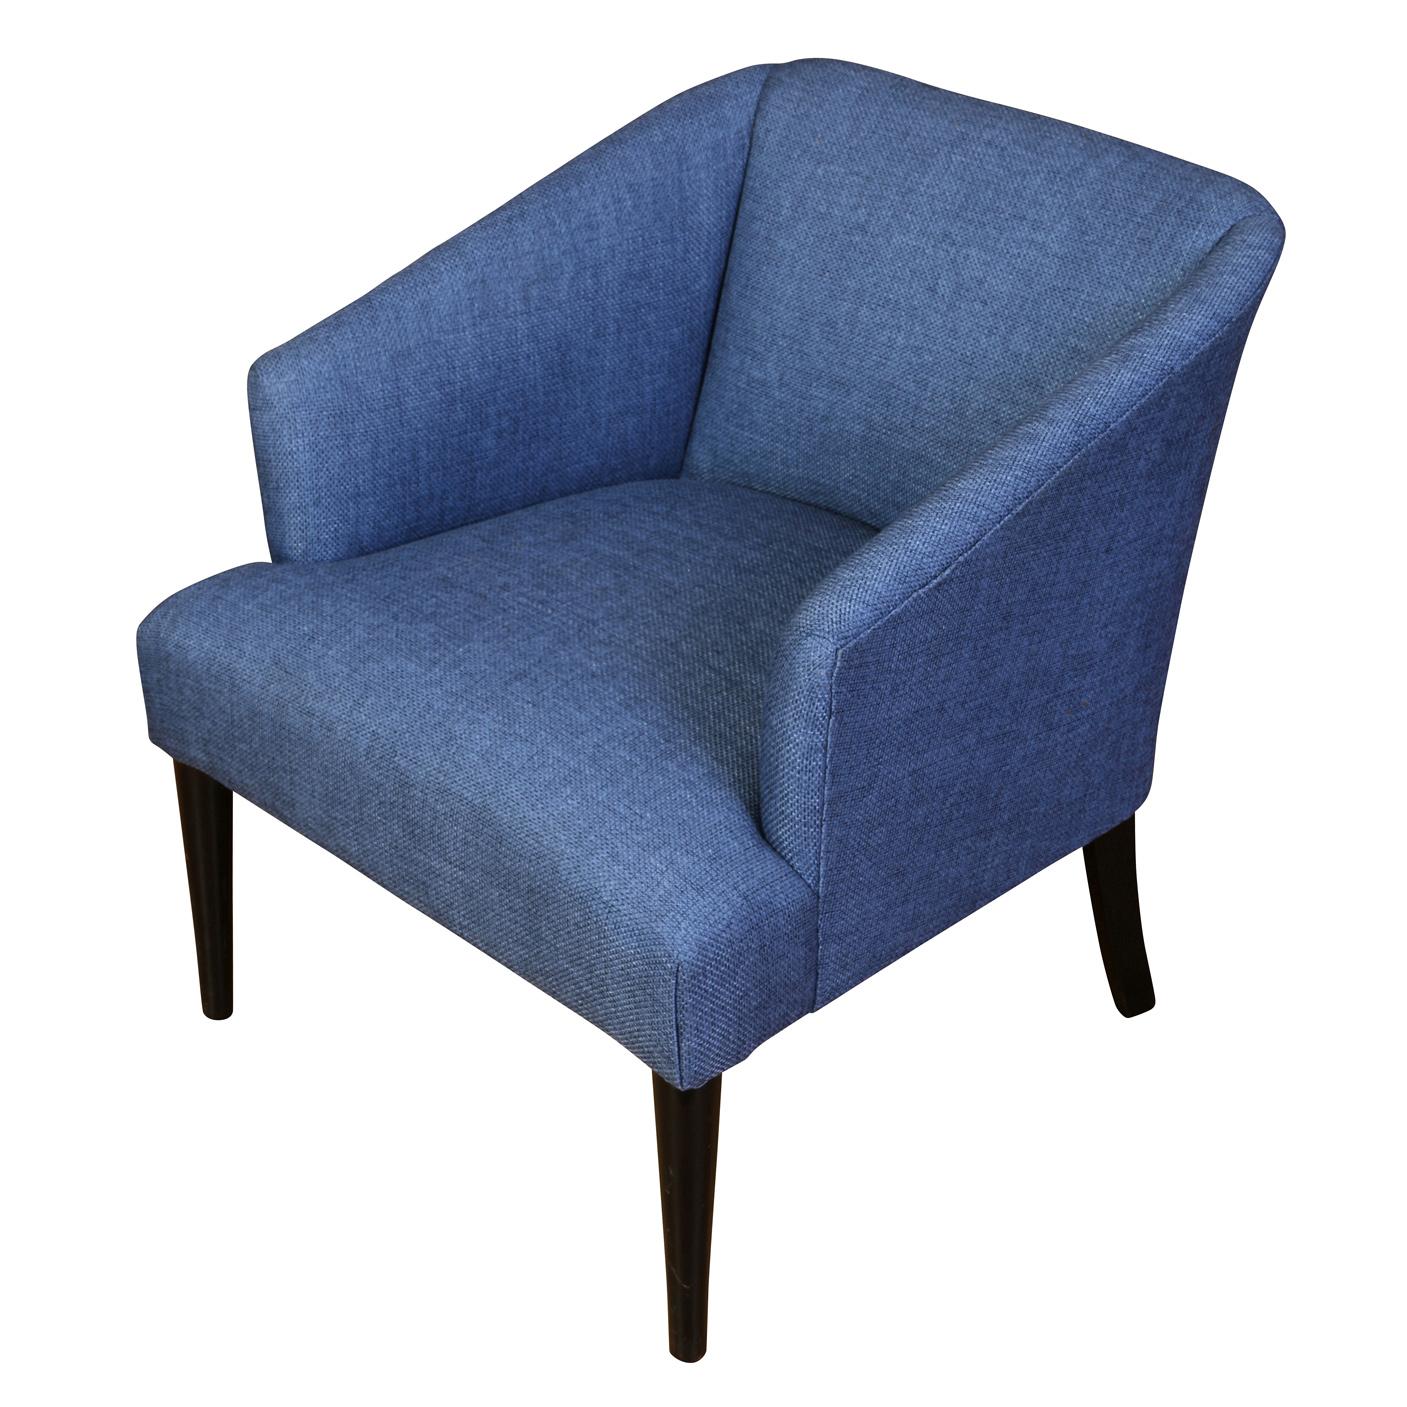 Pair of Blue Modern Upholstered Lounge Chairs In Good Condition For Sale In Locust Valley, NY